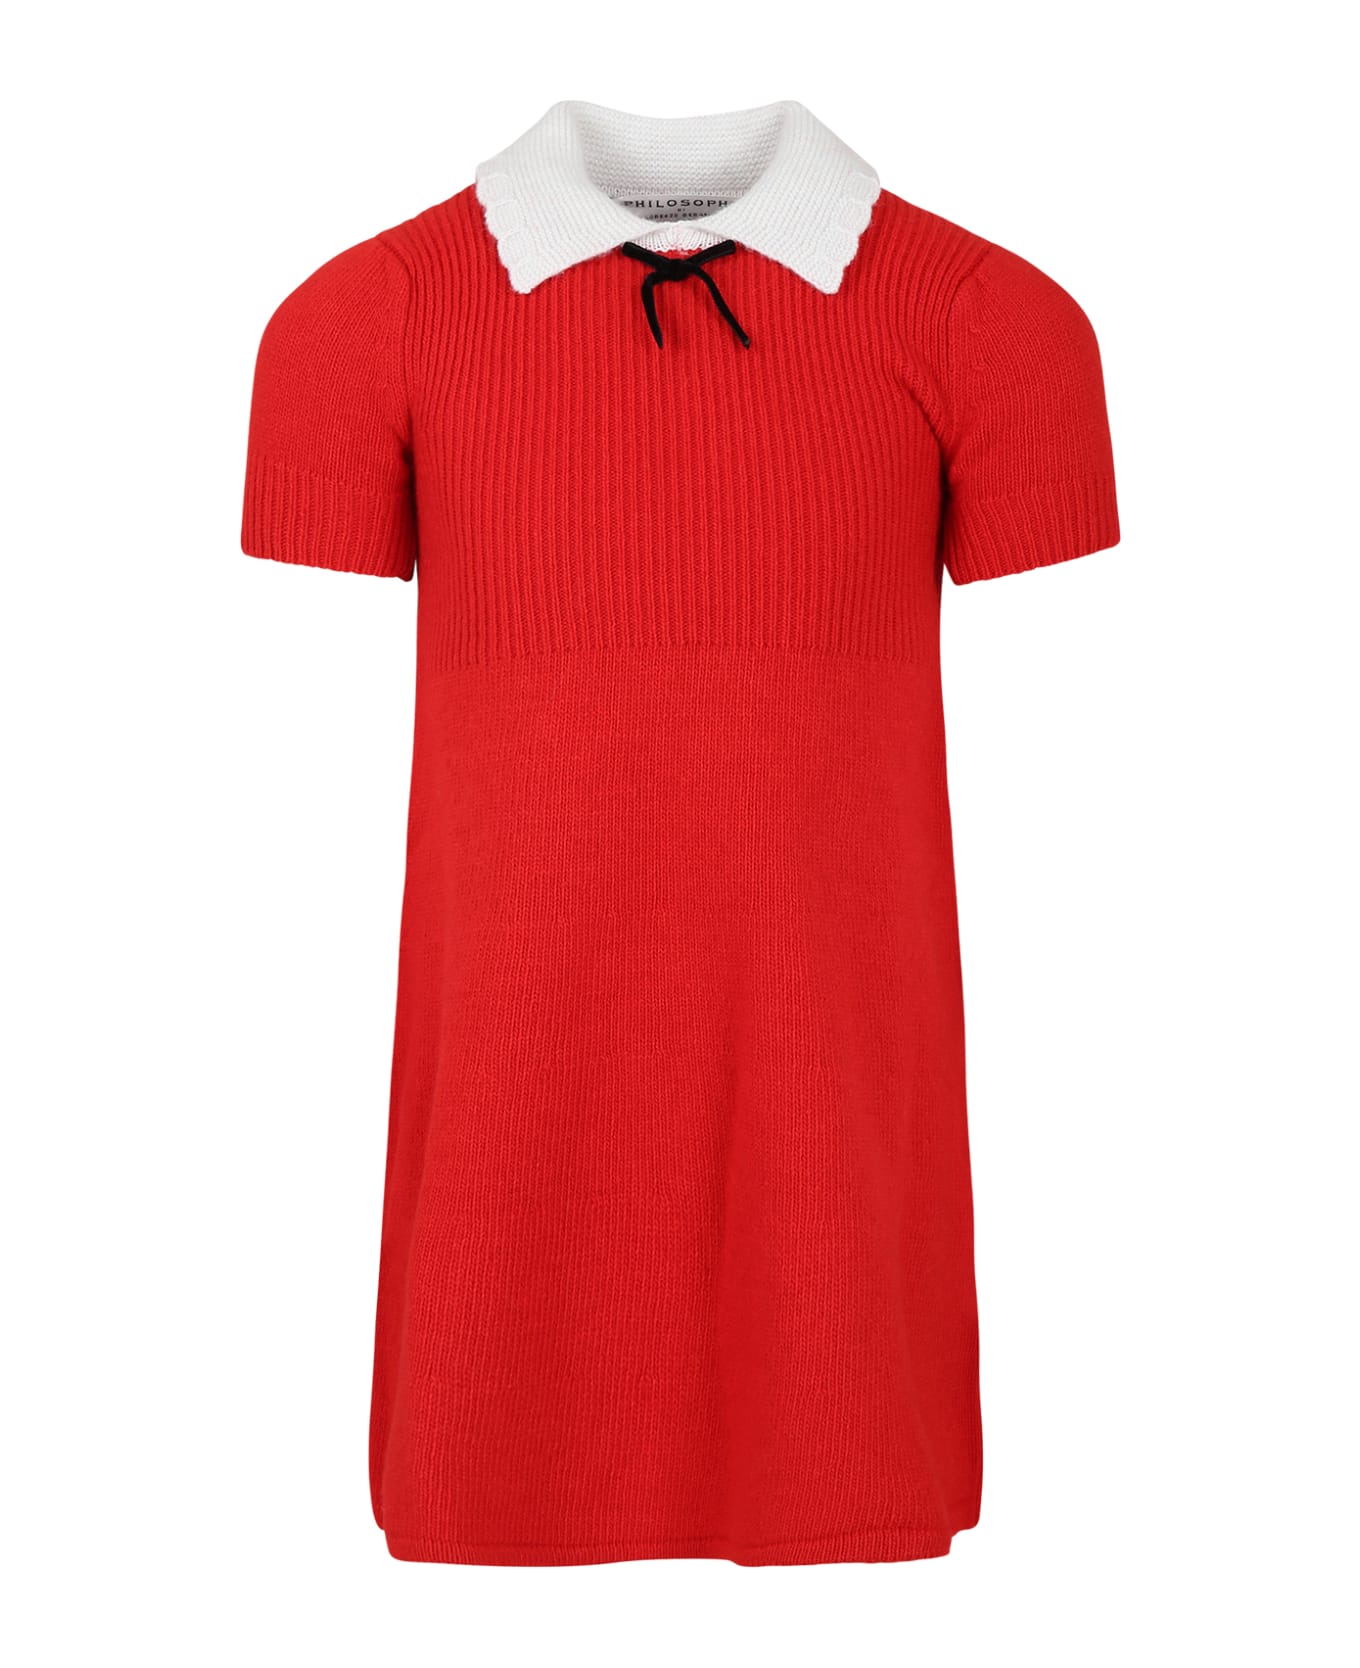 Philosophy di Lorenzo Serafini Kids Red Dress For Girl With Bow - Red